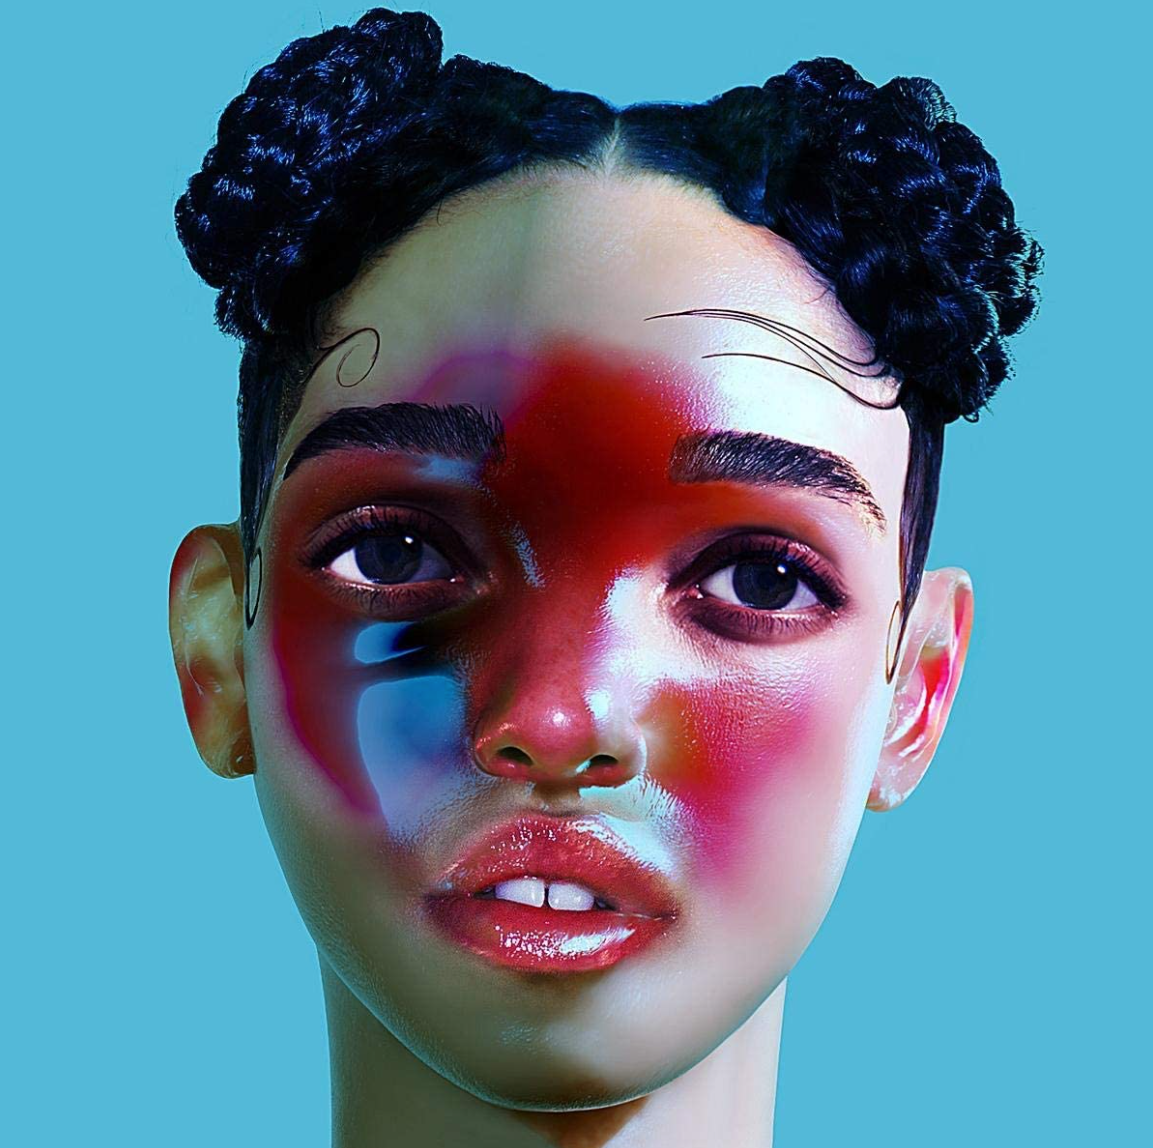 FKA Twigs' LP1: Movement, Mystery and Taking Risks